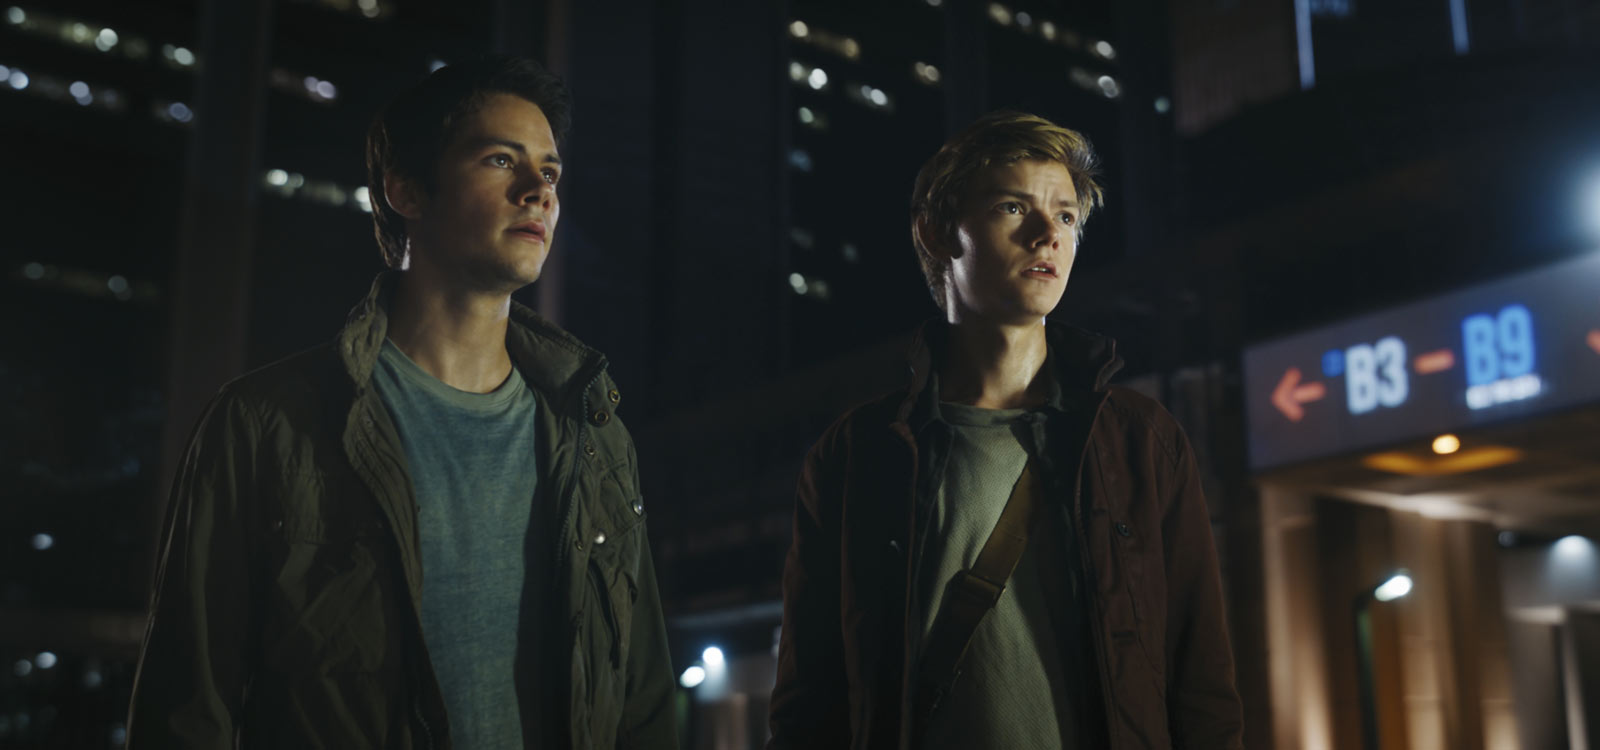 Third Maze Runner movie makes no sense, even if you've seen the earlier  installments, Movie Reviews, Spokane, The Pacific Northwest Inlander